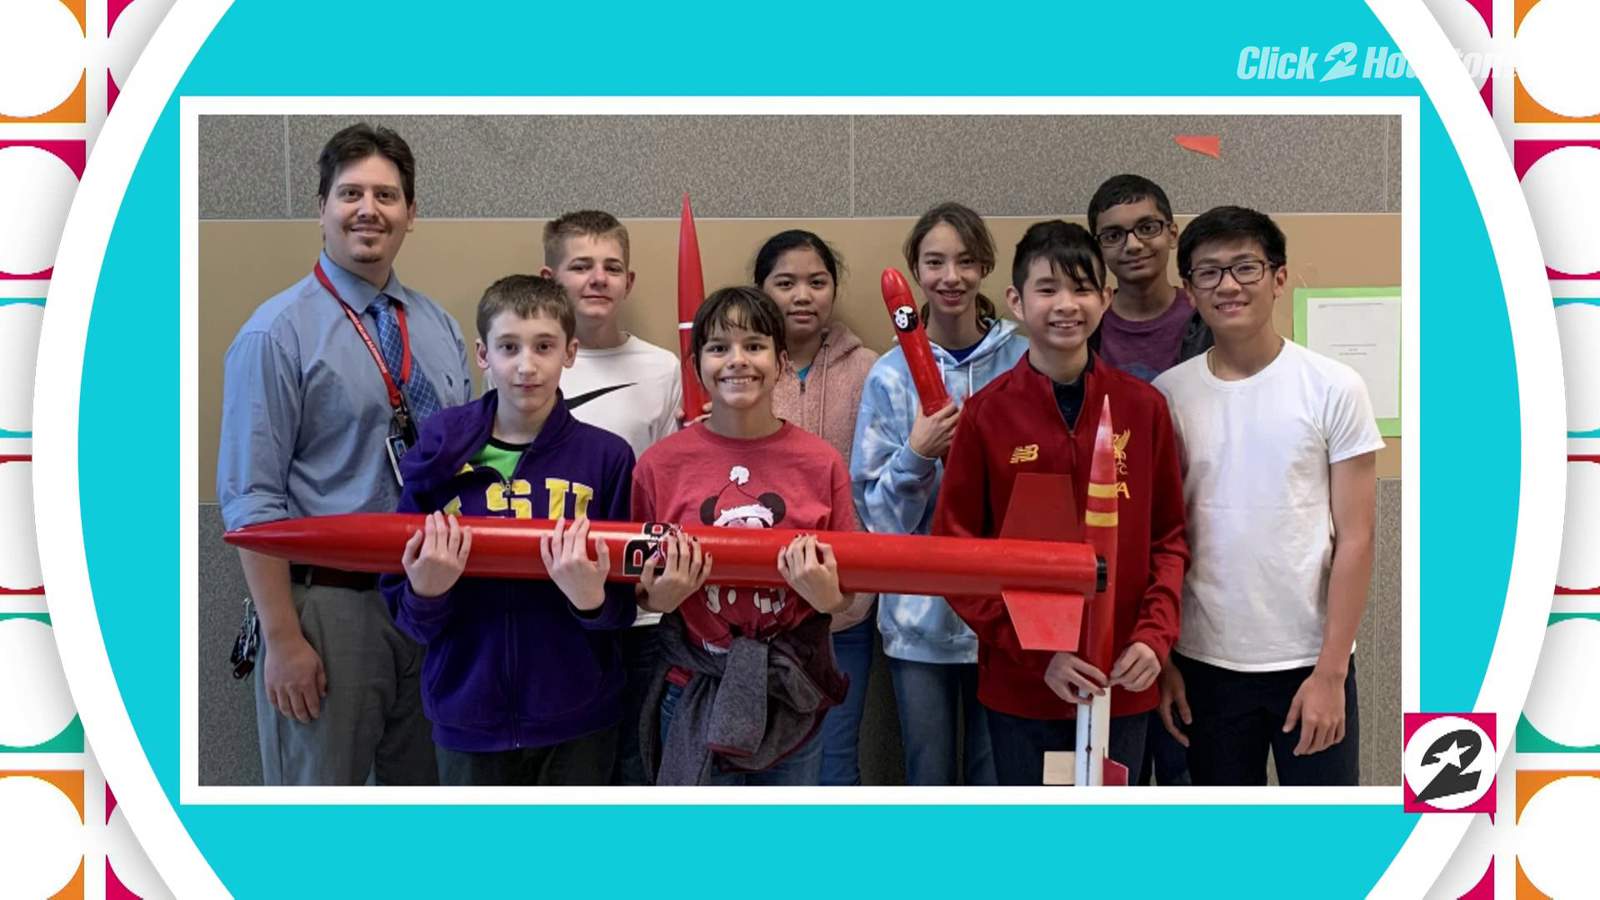 Alvin ISD’s rocketry program is out of this world